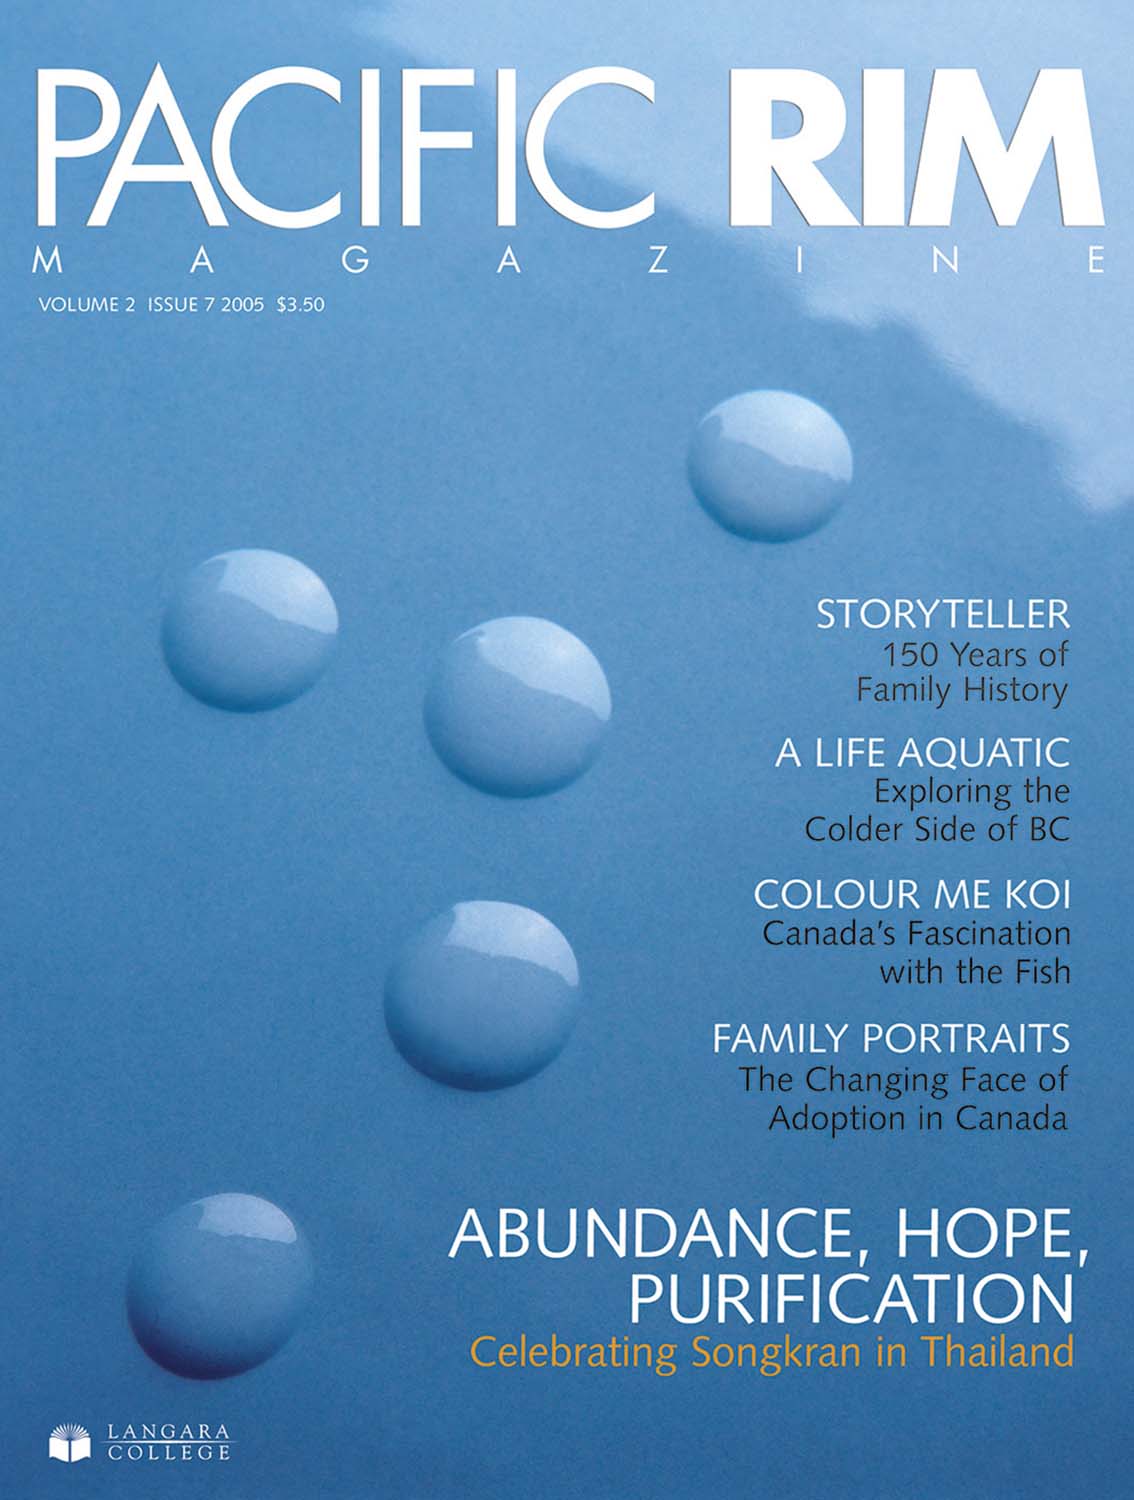 2005 Pacific Rim Cover. "Abundance, Hope, Purification." Cover Story. Image of water droplets.